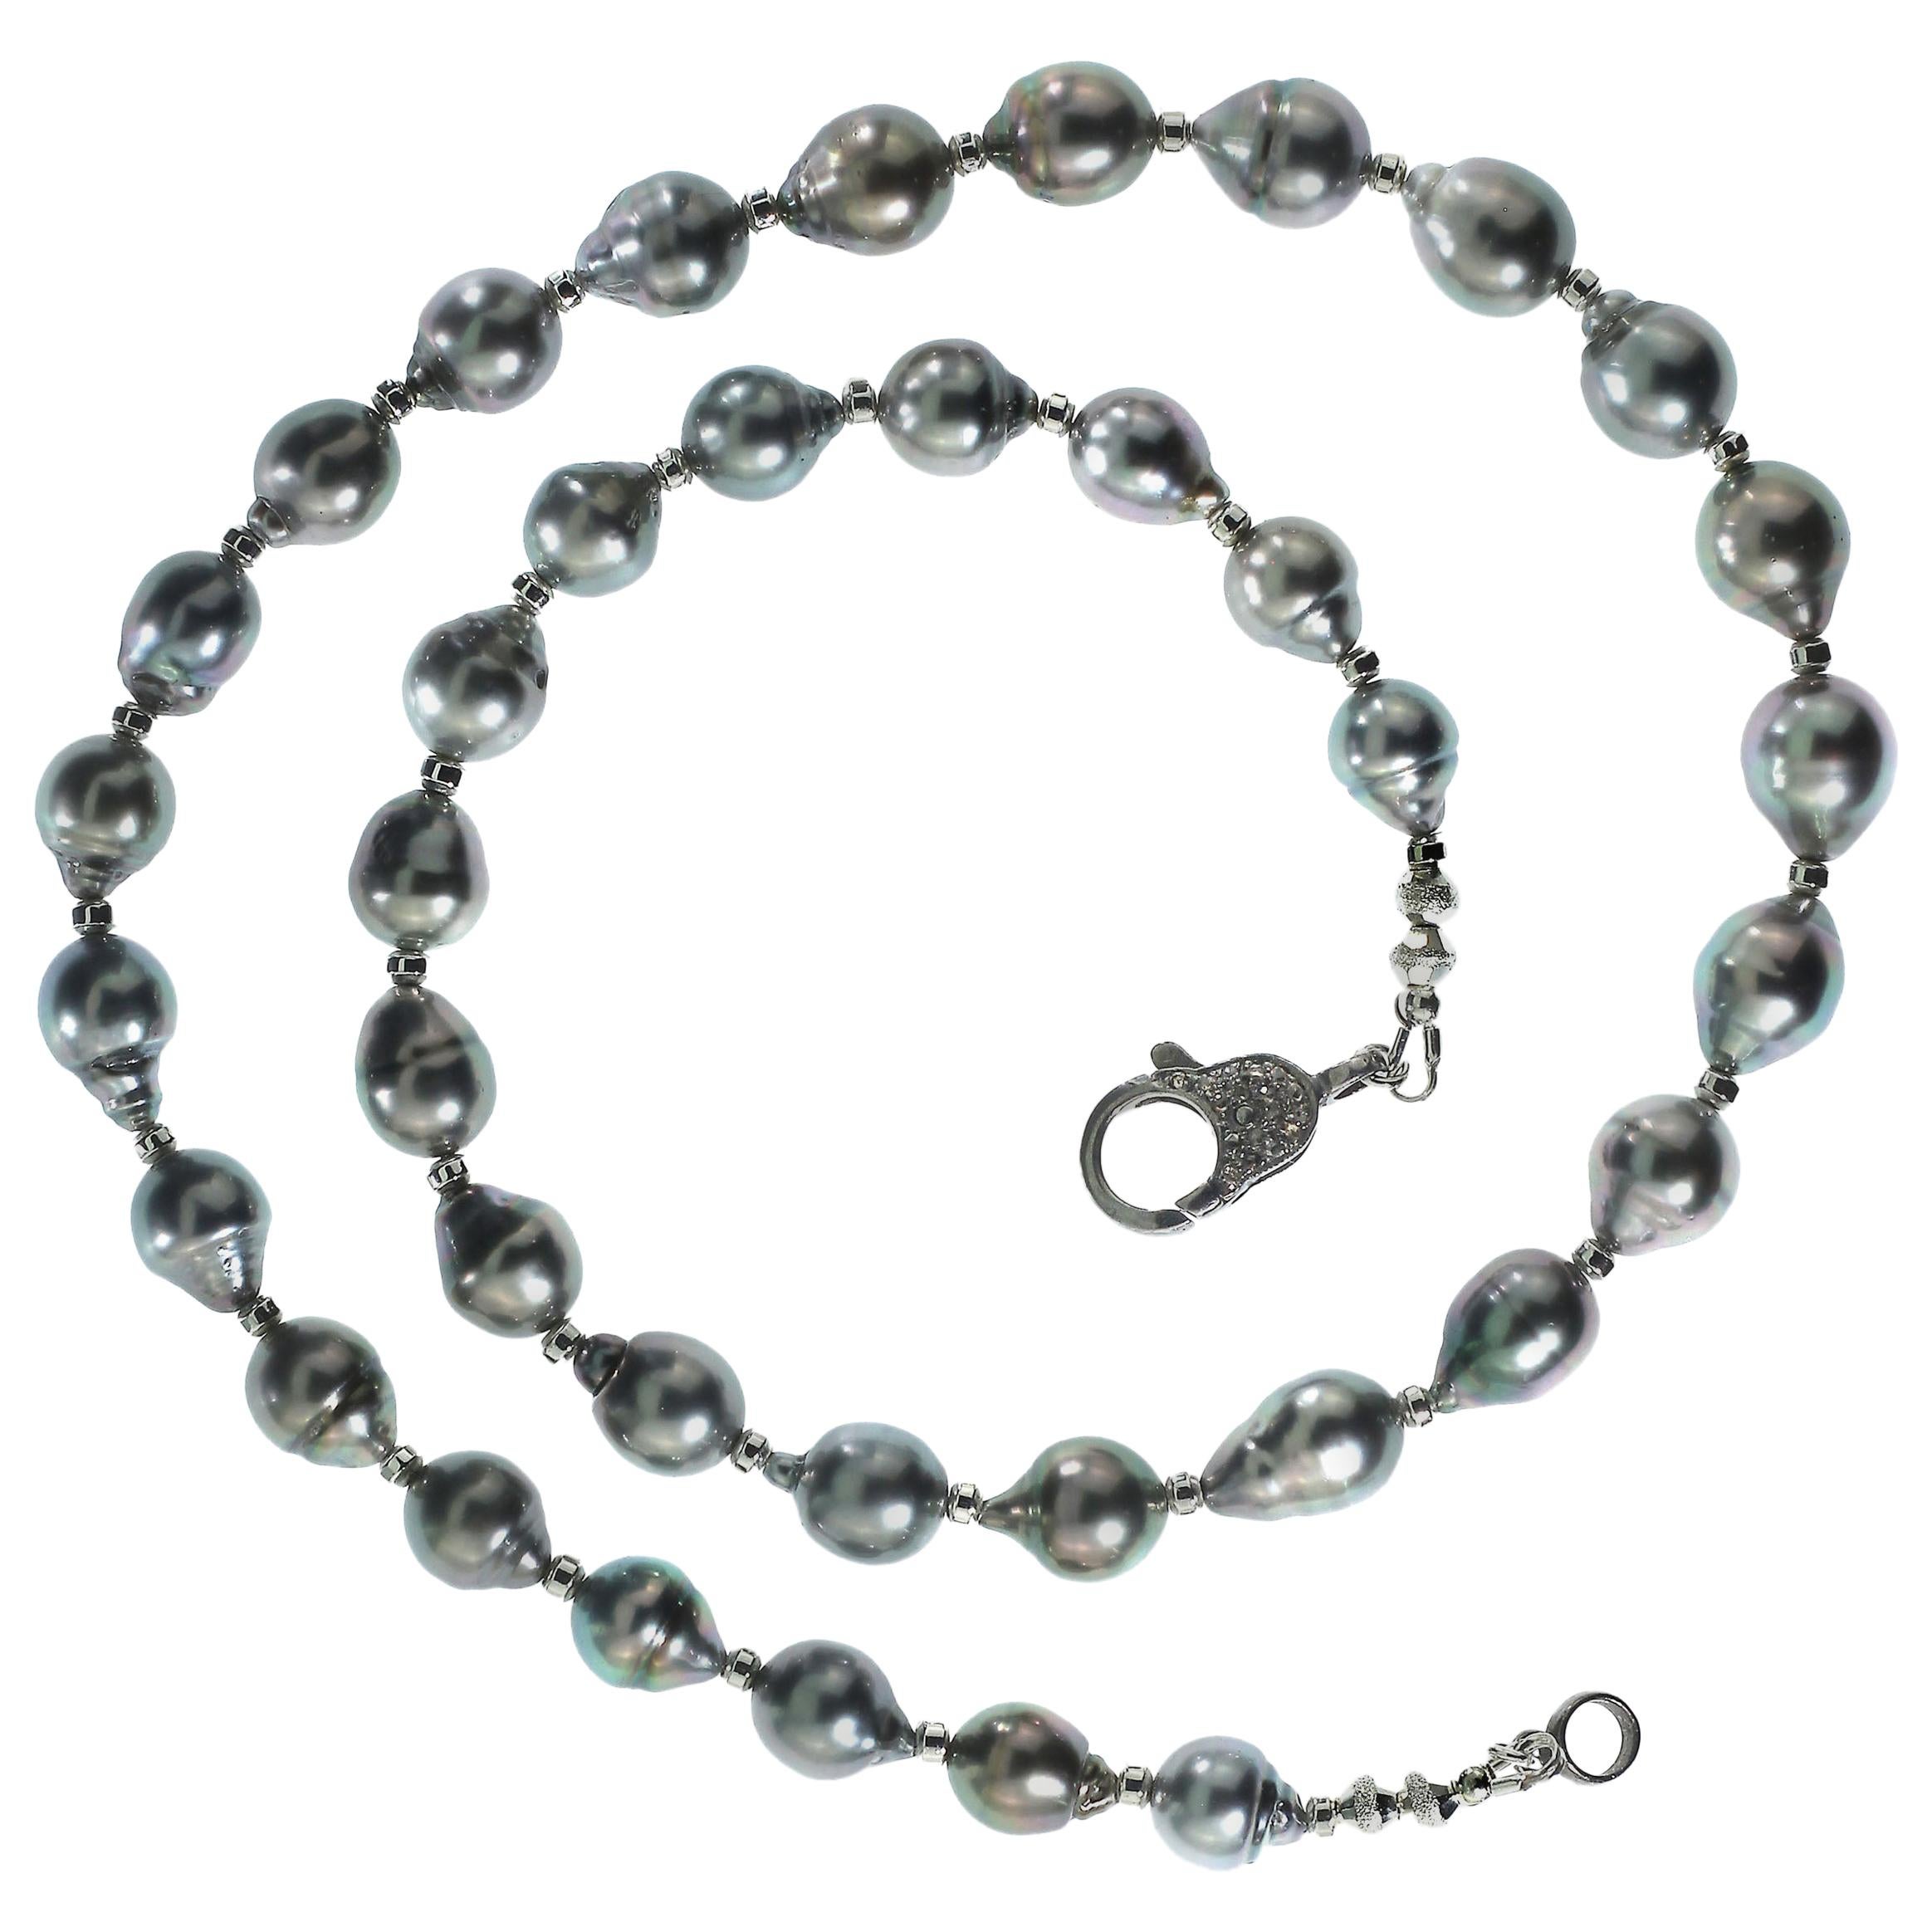 'Nothing gives the luxury of Pearls. Keep them in mind.' Diana Vreeland

Elegant, unique silver Tahitian Pearl necklace to grace your neck. This one of a kind 21 inch necklace is a 'must have' for all pearl lovers. Sparkling silver accents enhance